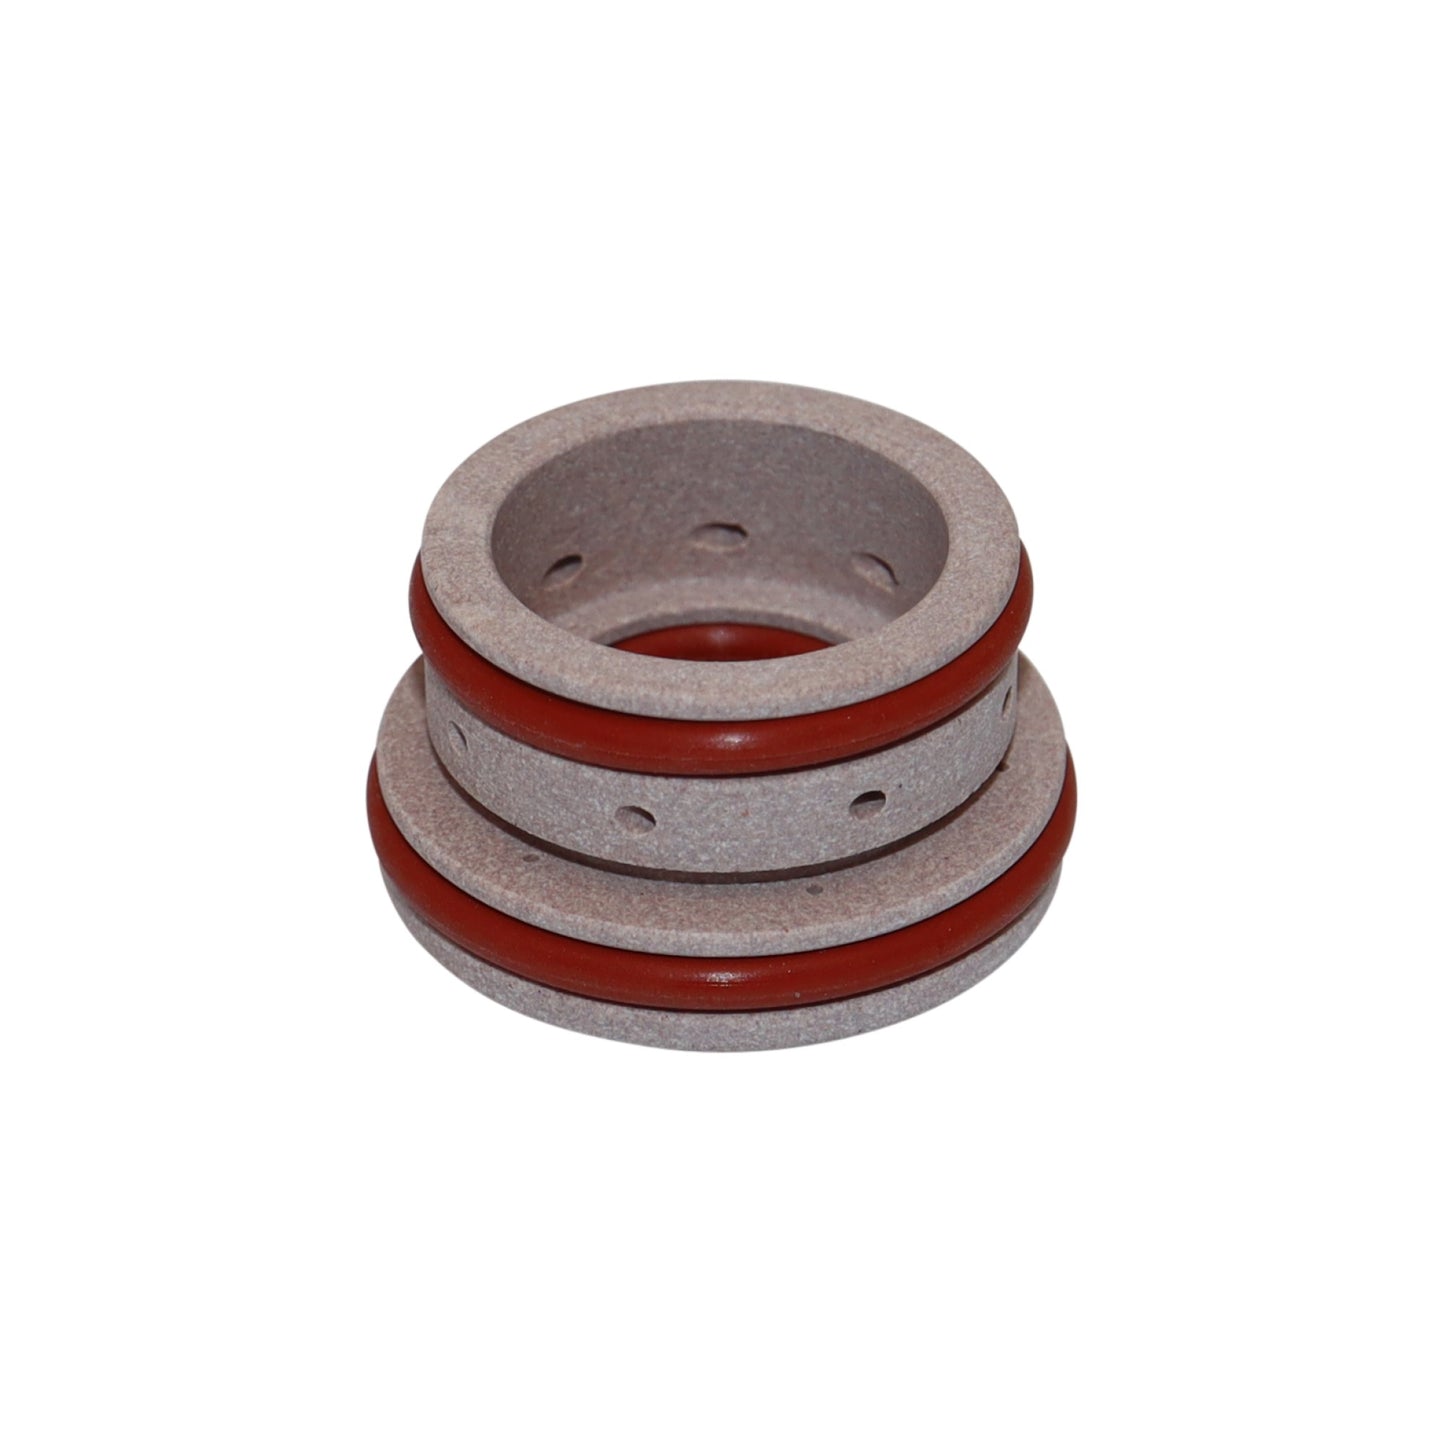 220631 Swirl ring 400 AMPS, O2/AIR, FOR CARBON STEEL BEVEL CUTTING